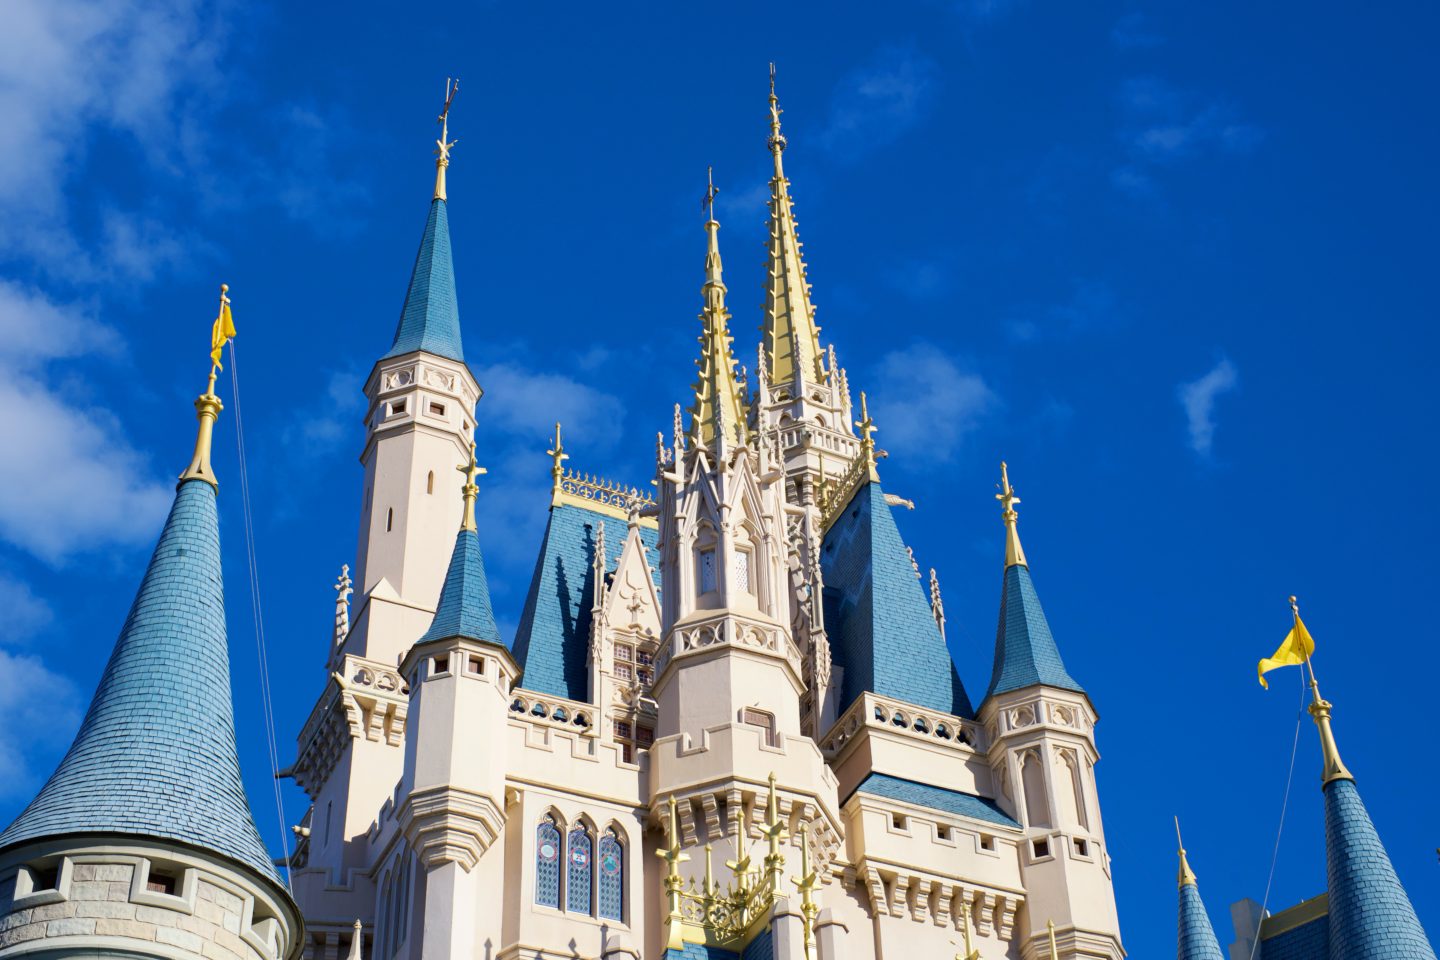 A beautiful image of the Cinderella Castle in Magic Kingdom but as experience teaches us, life is anything but a fairy tale